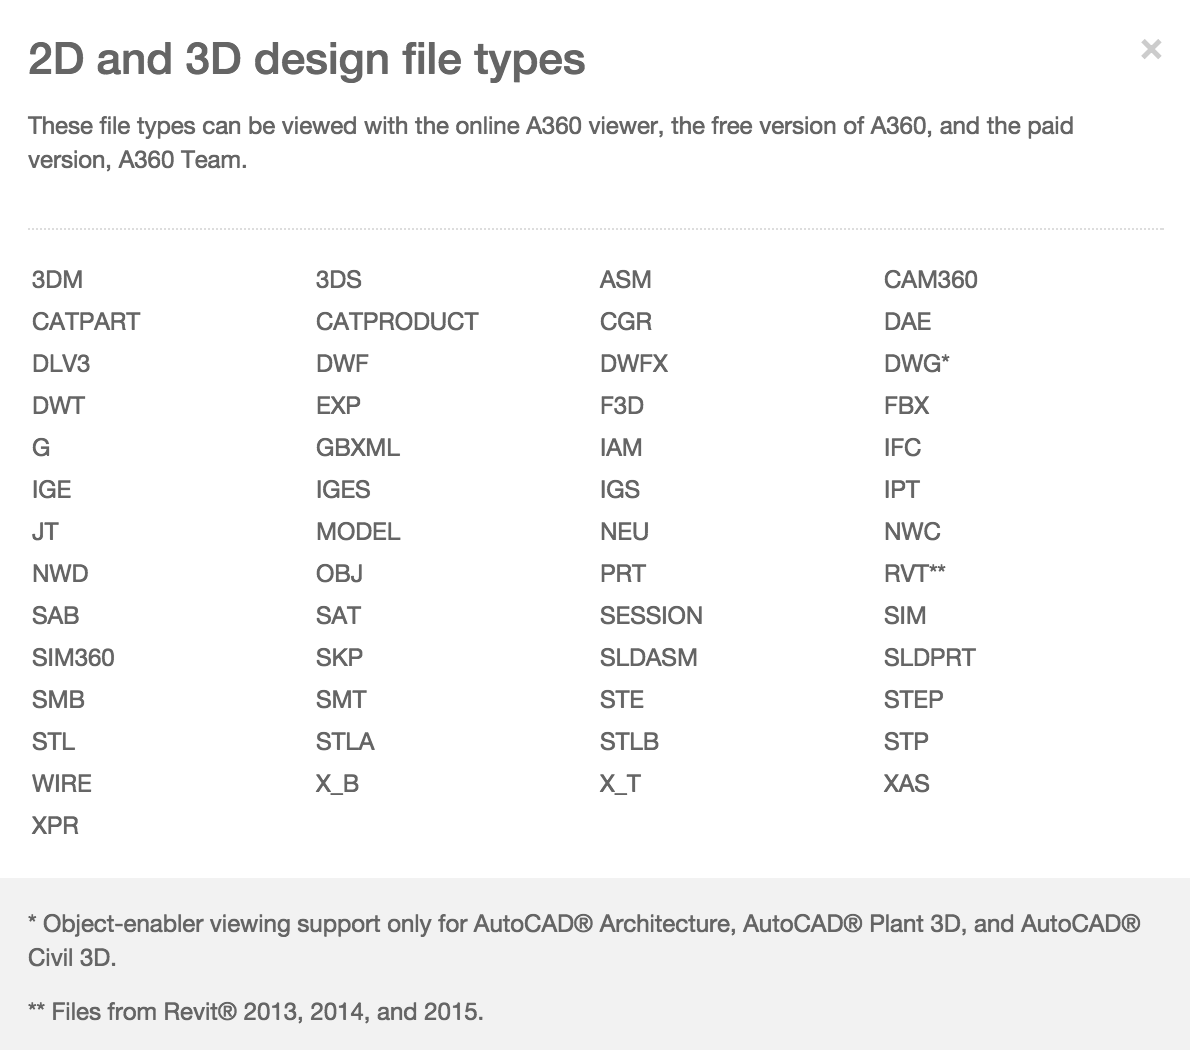 A360 viewer design file types